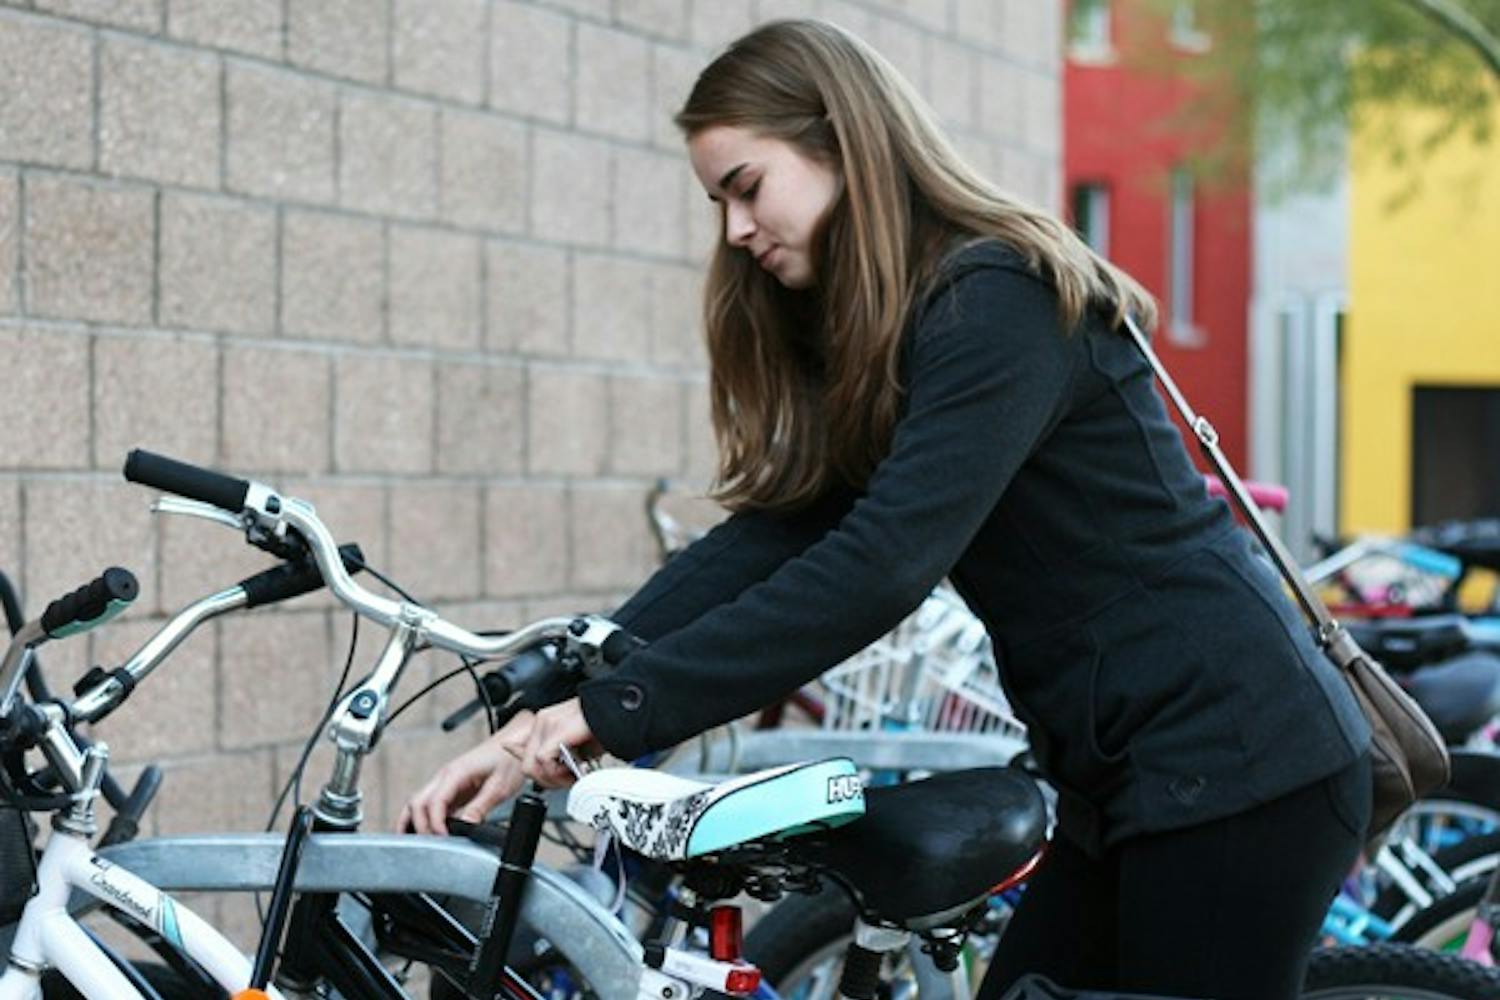 Freshman management major Raquel Thosesen locks up her bike after riding into the Barrett corridors in Tempe on Monday. Barrett Deans have threatened to ban bikes in the complex or station security guards at entrances if the Walk Your Wheels mandate is not obeyed. (Photo by Perla Farias)